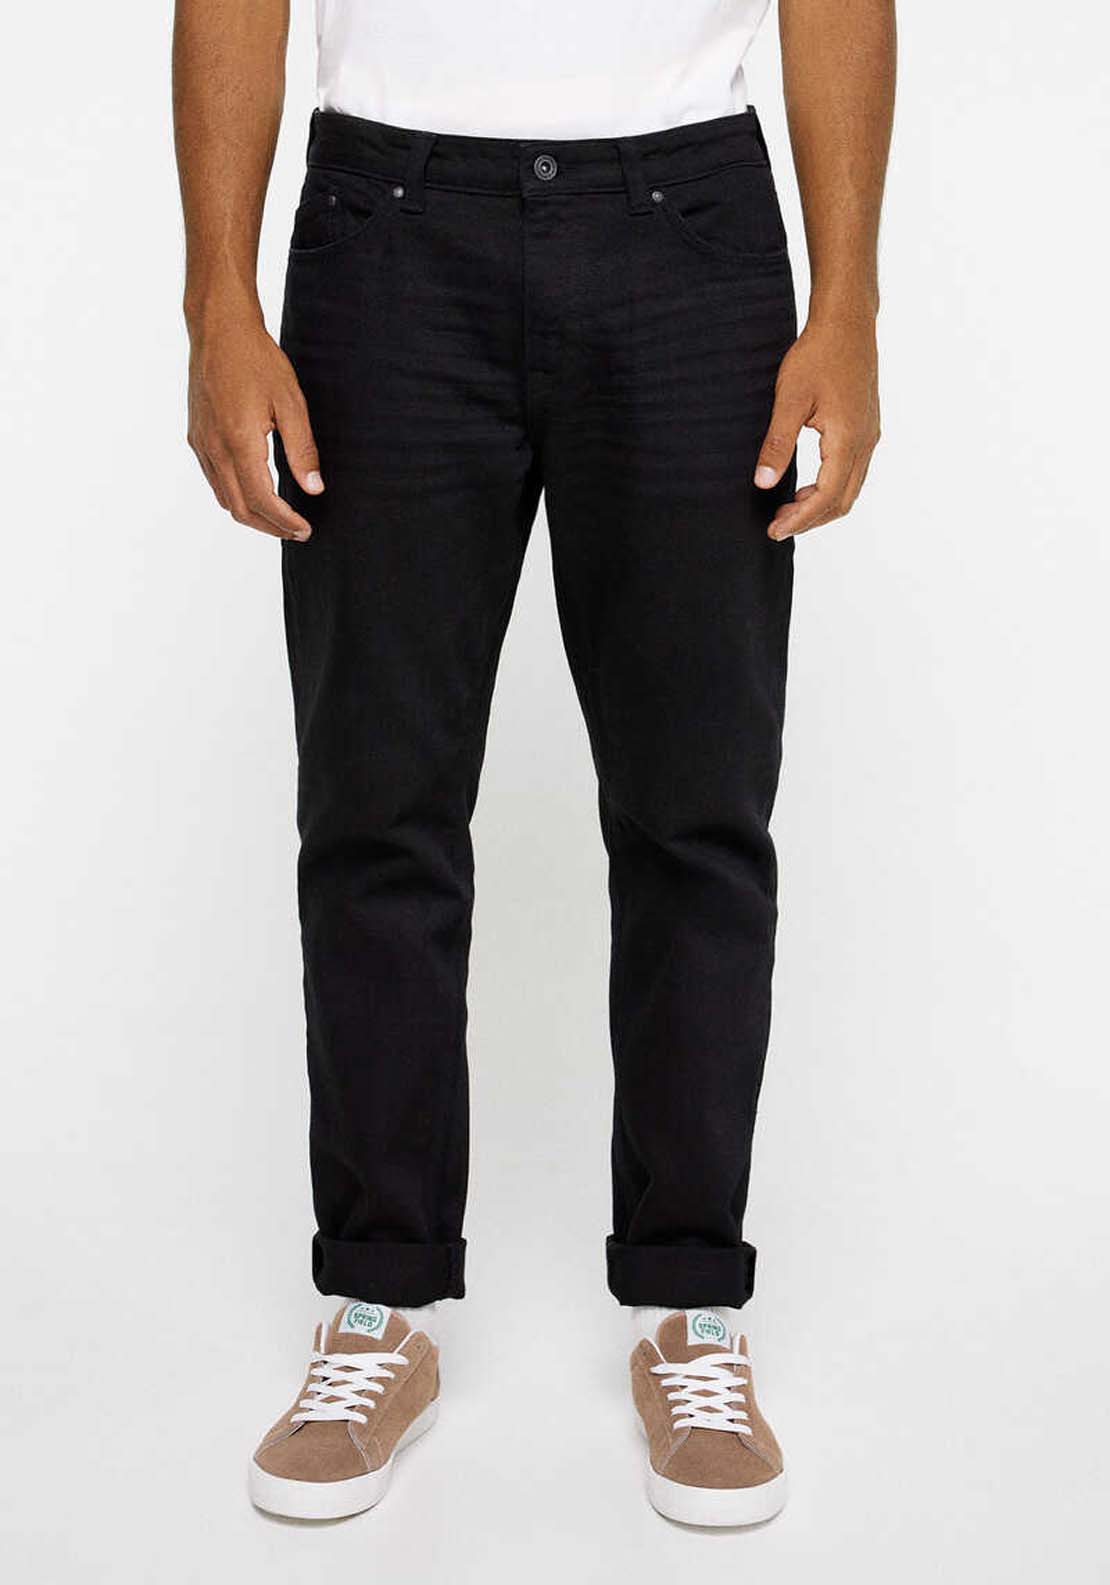 Springfield Washed black regular fit jeans - Black 1 Shaws Department Stores